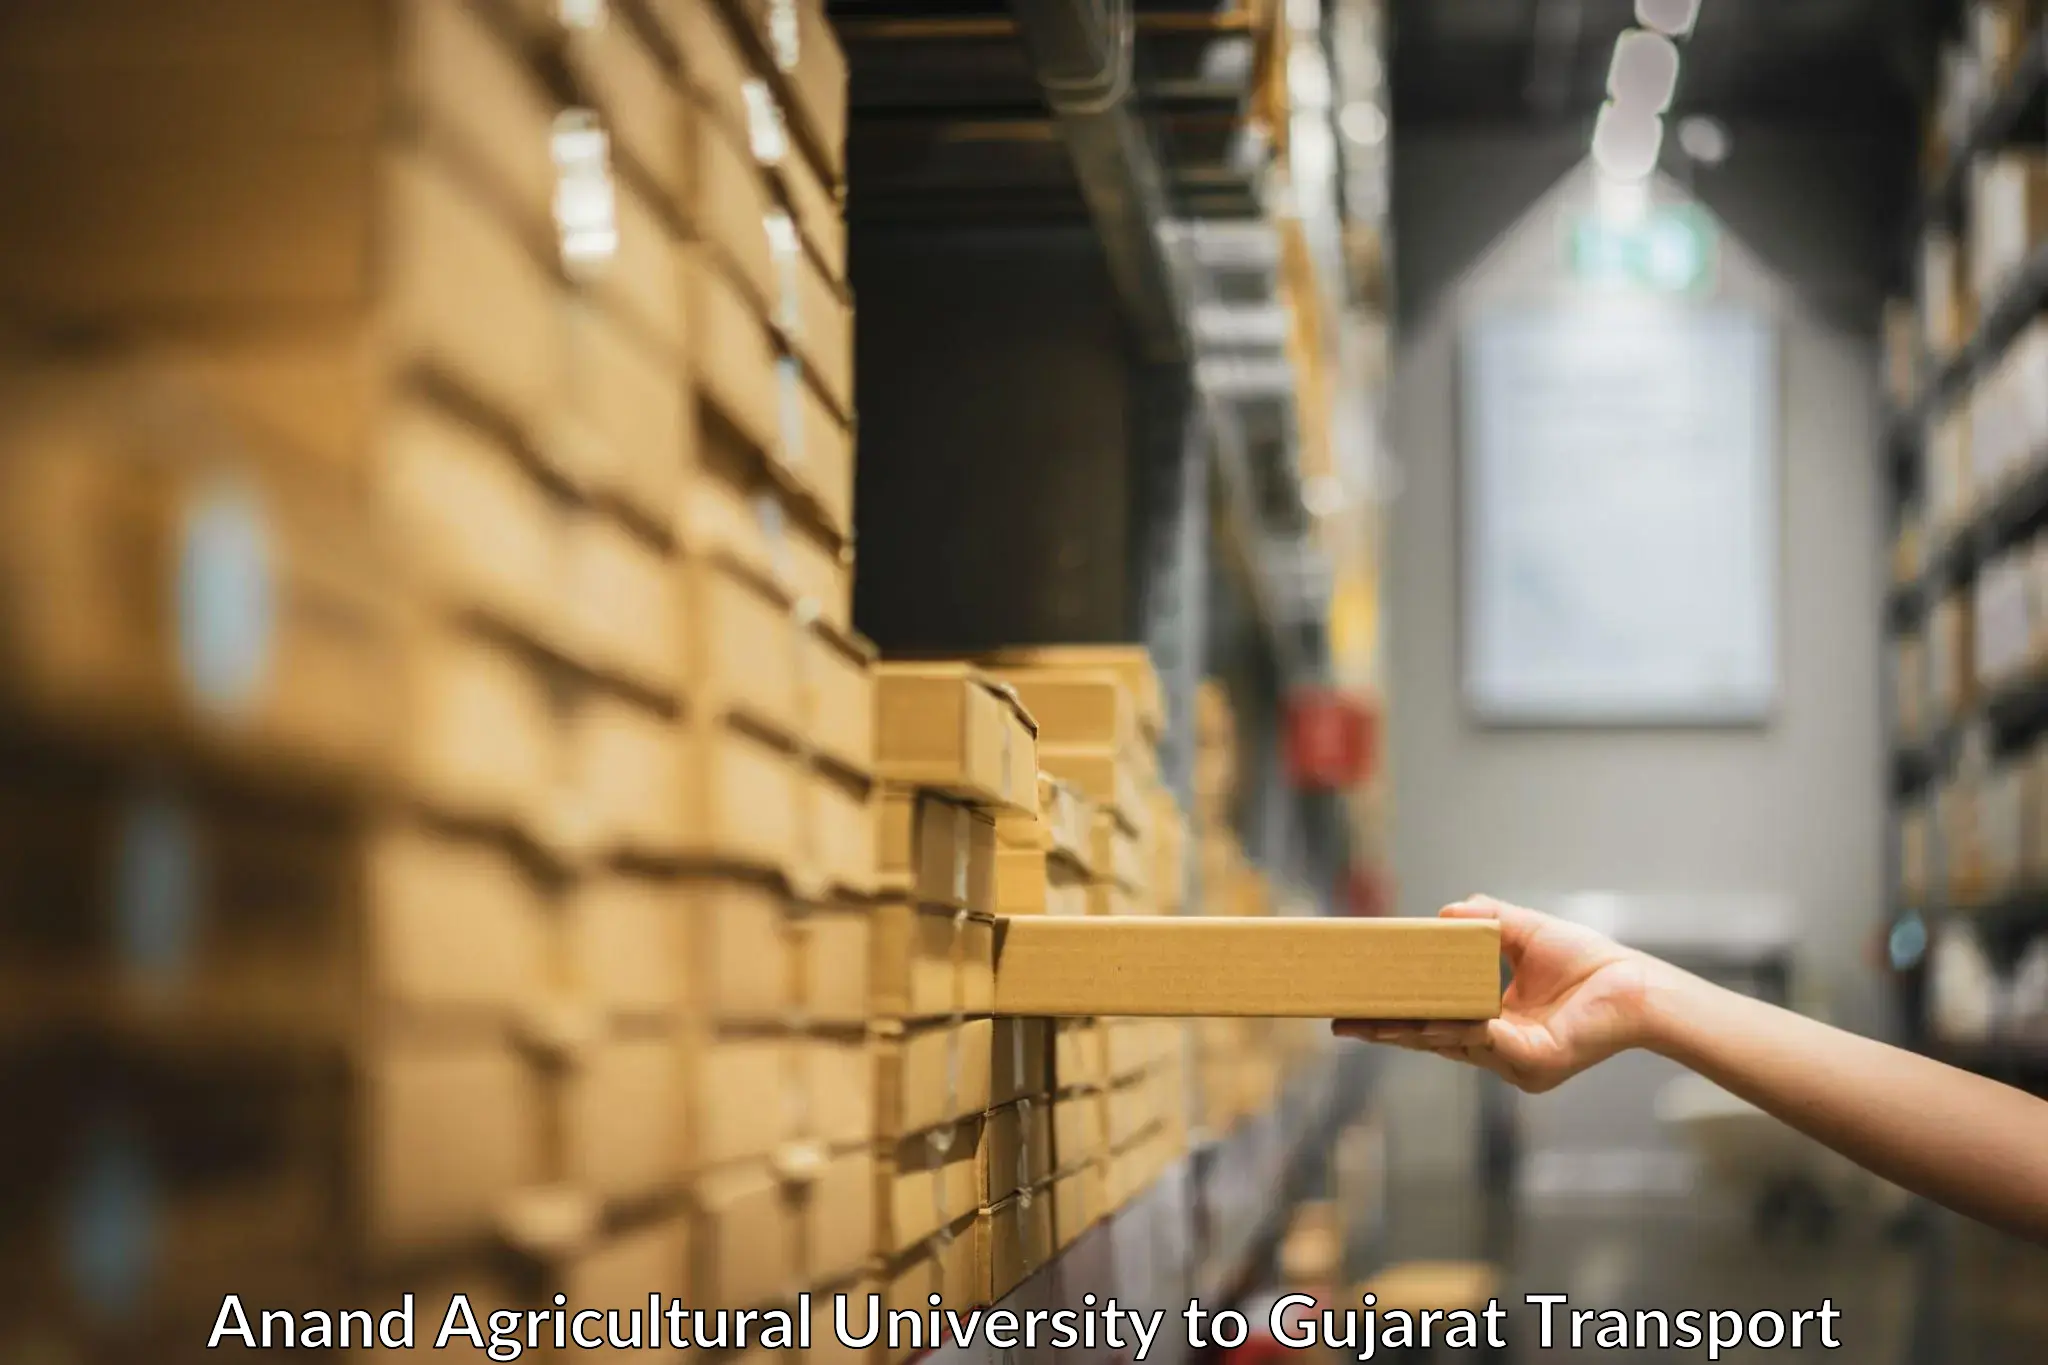 Cargo transport services Anand Agricultural University to Deesa